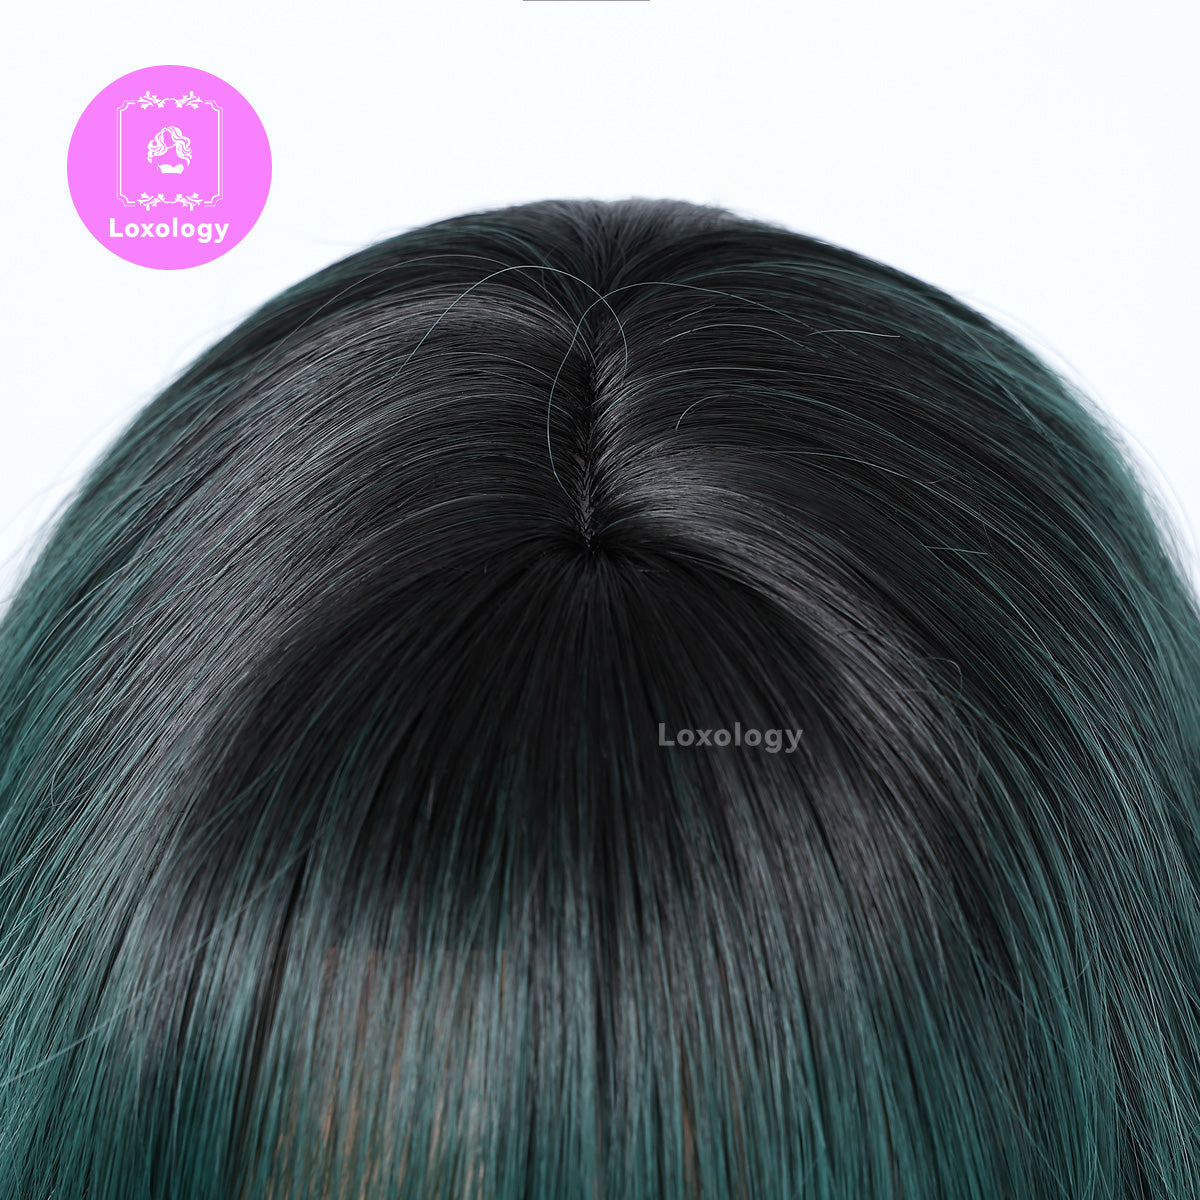 【Delaney】Loxology | 12 Inches Long Curly Green Wigs with Bangs Synthetic Wigs